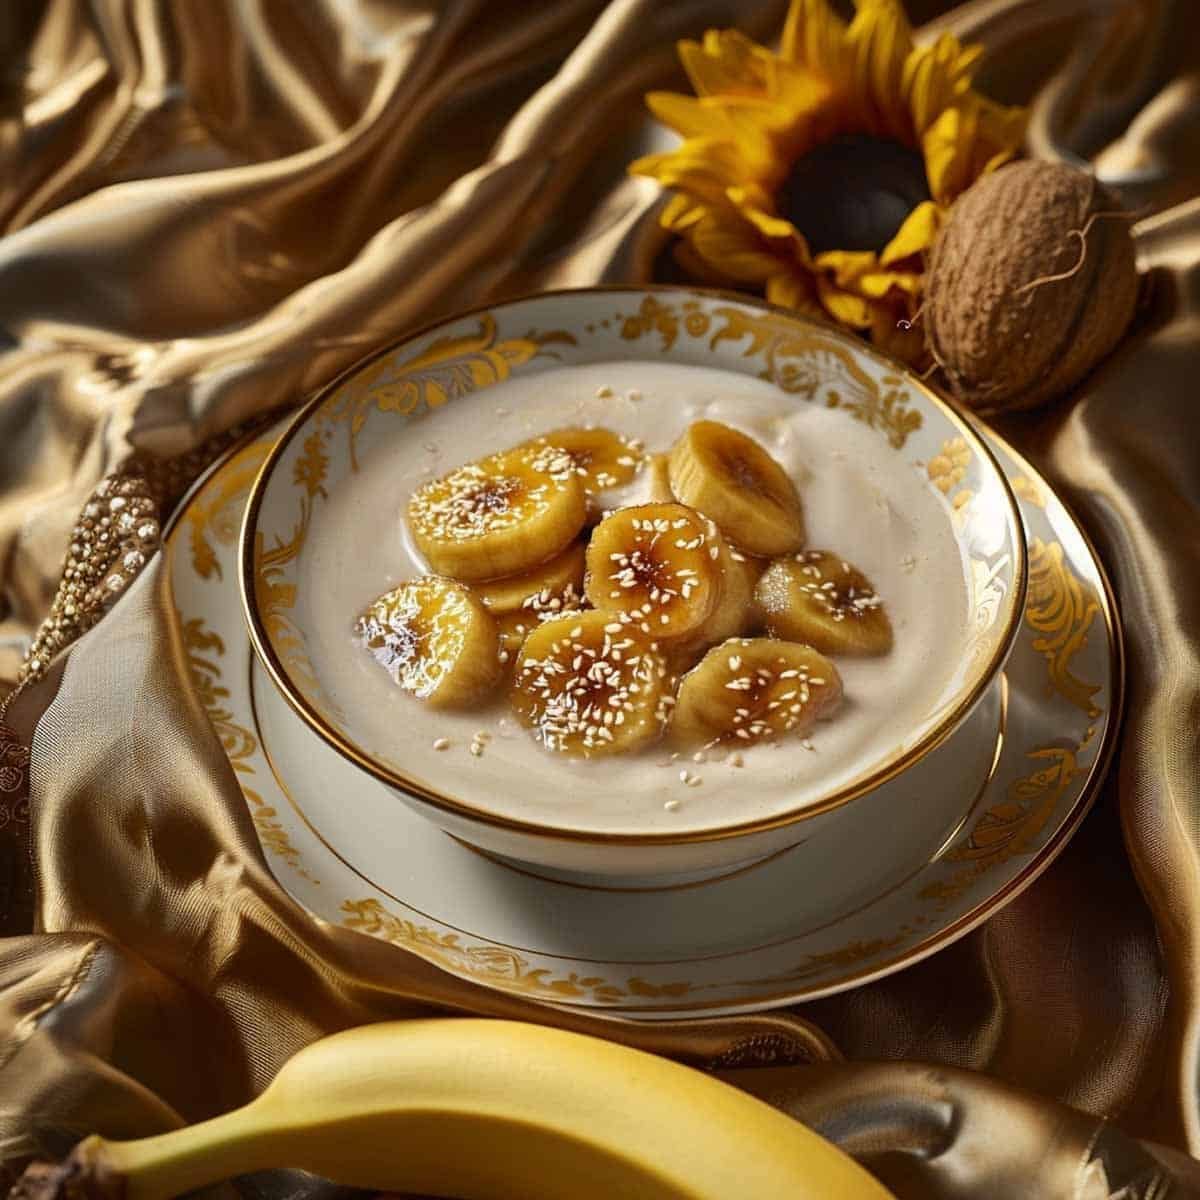 Bowl of bananas and coconut milk dessert on a gold tablecloth.